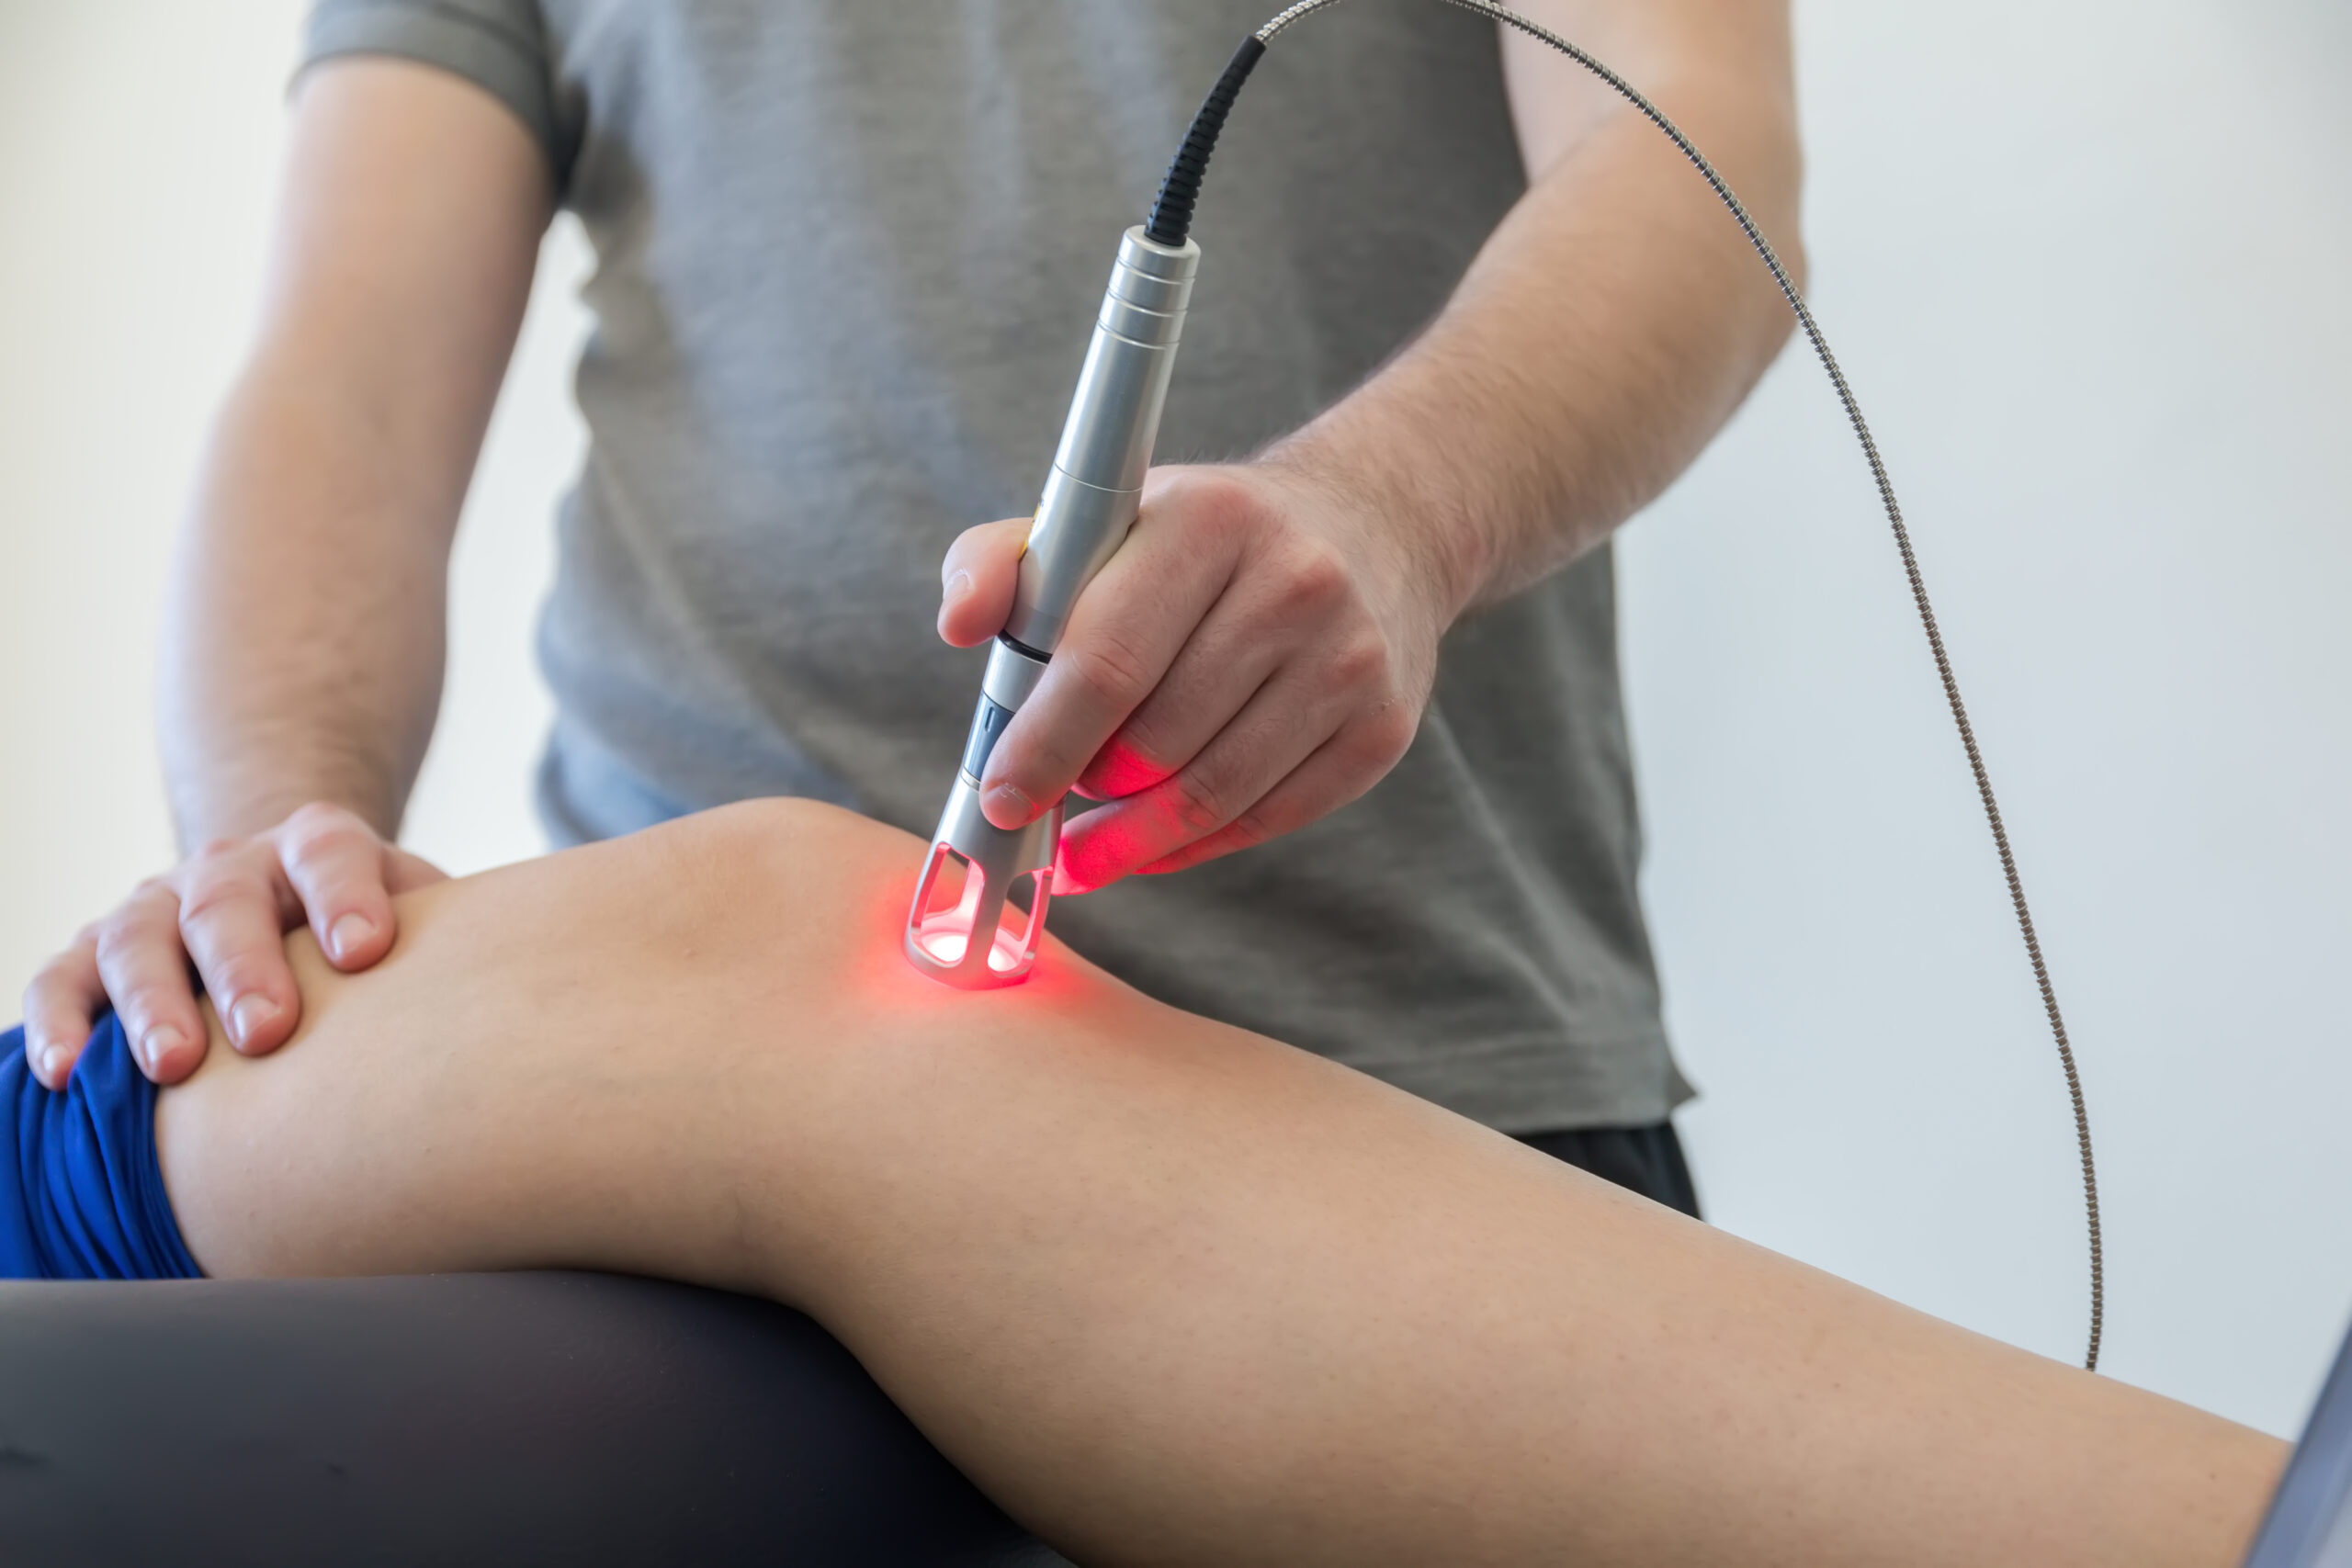 Laser,Therapy,On,A,Knee,Used,To,Treat,Pain.,Selective